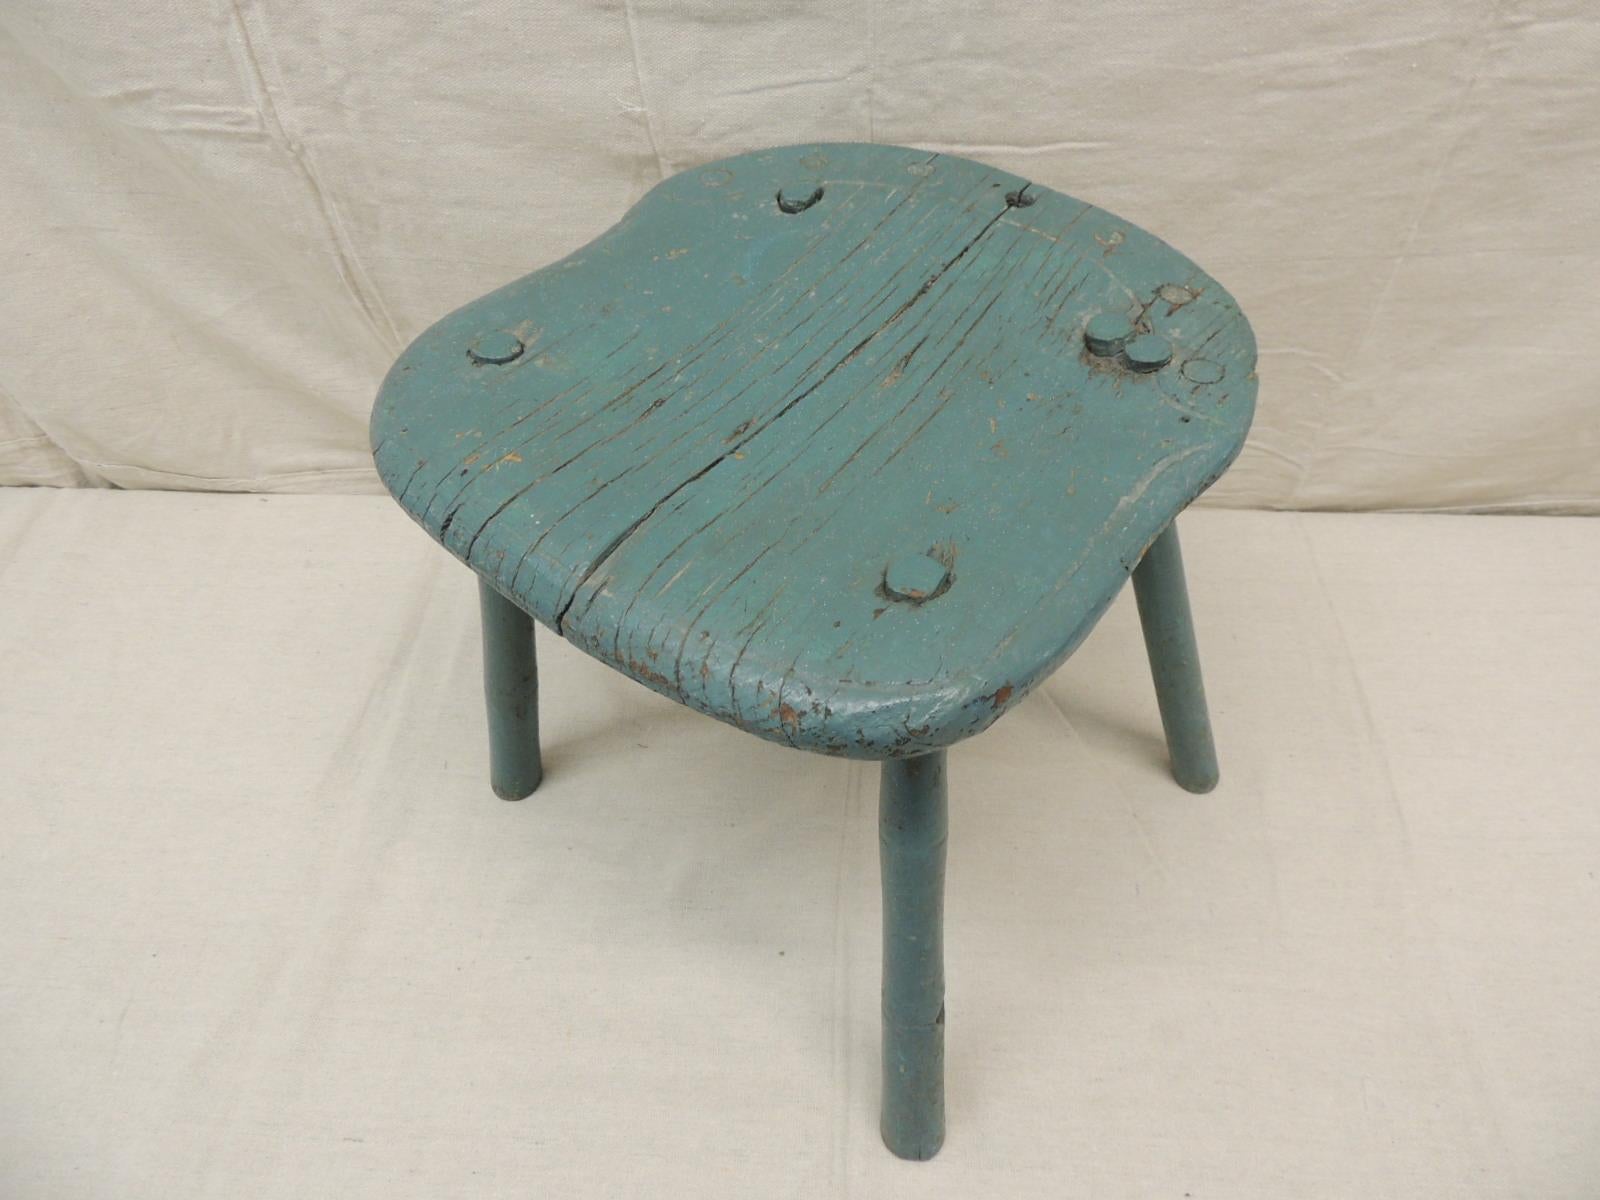 Antique Rustic painted stool
Farmers stand.
Green glossy paint stool with peg round legs
Size: 12” x 13” x 11” H.
 